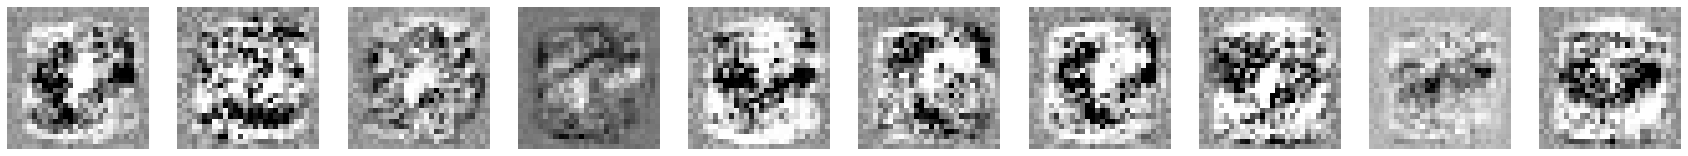 10 black-and-white images, mostly of crisp black-and-white noise in the center surrounded by a grayish border.